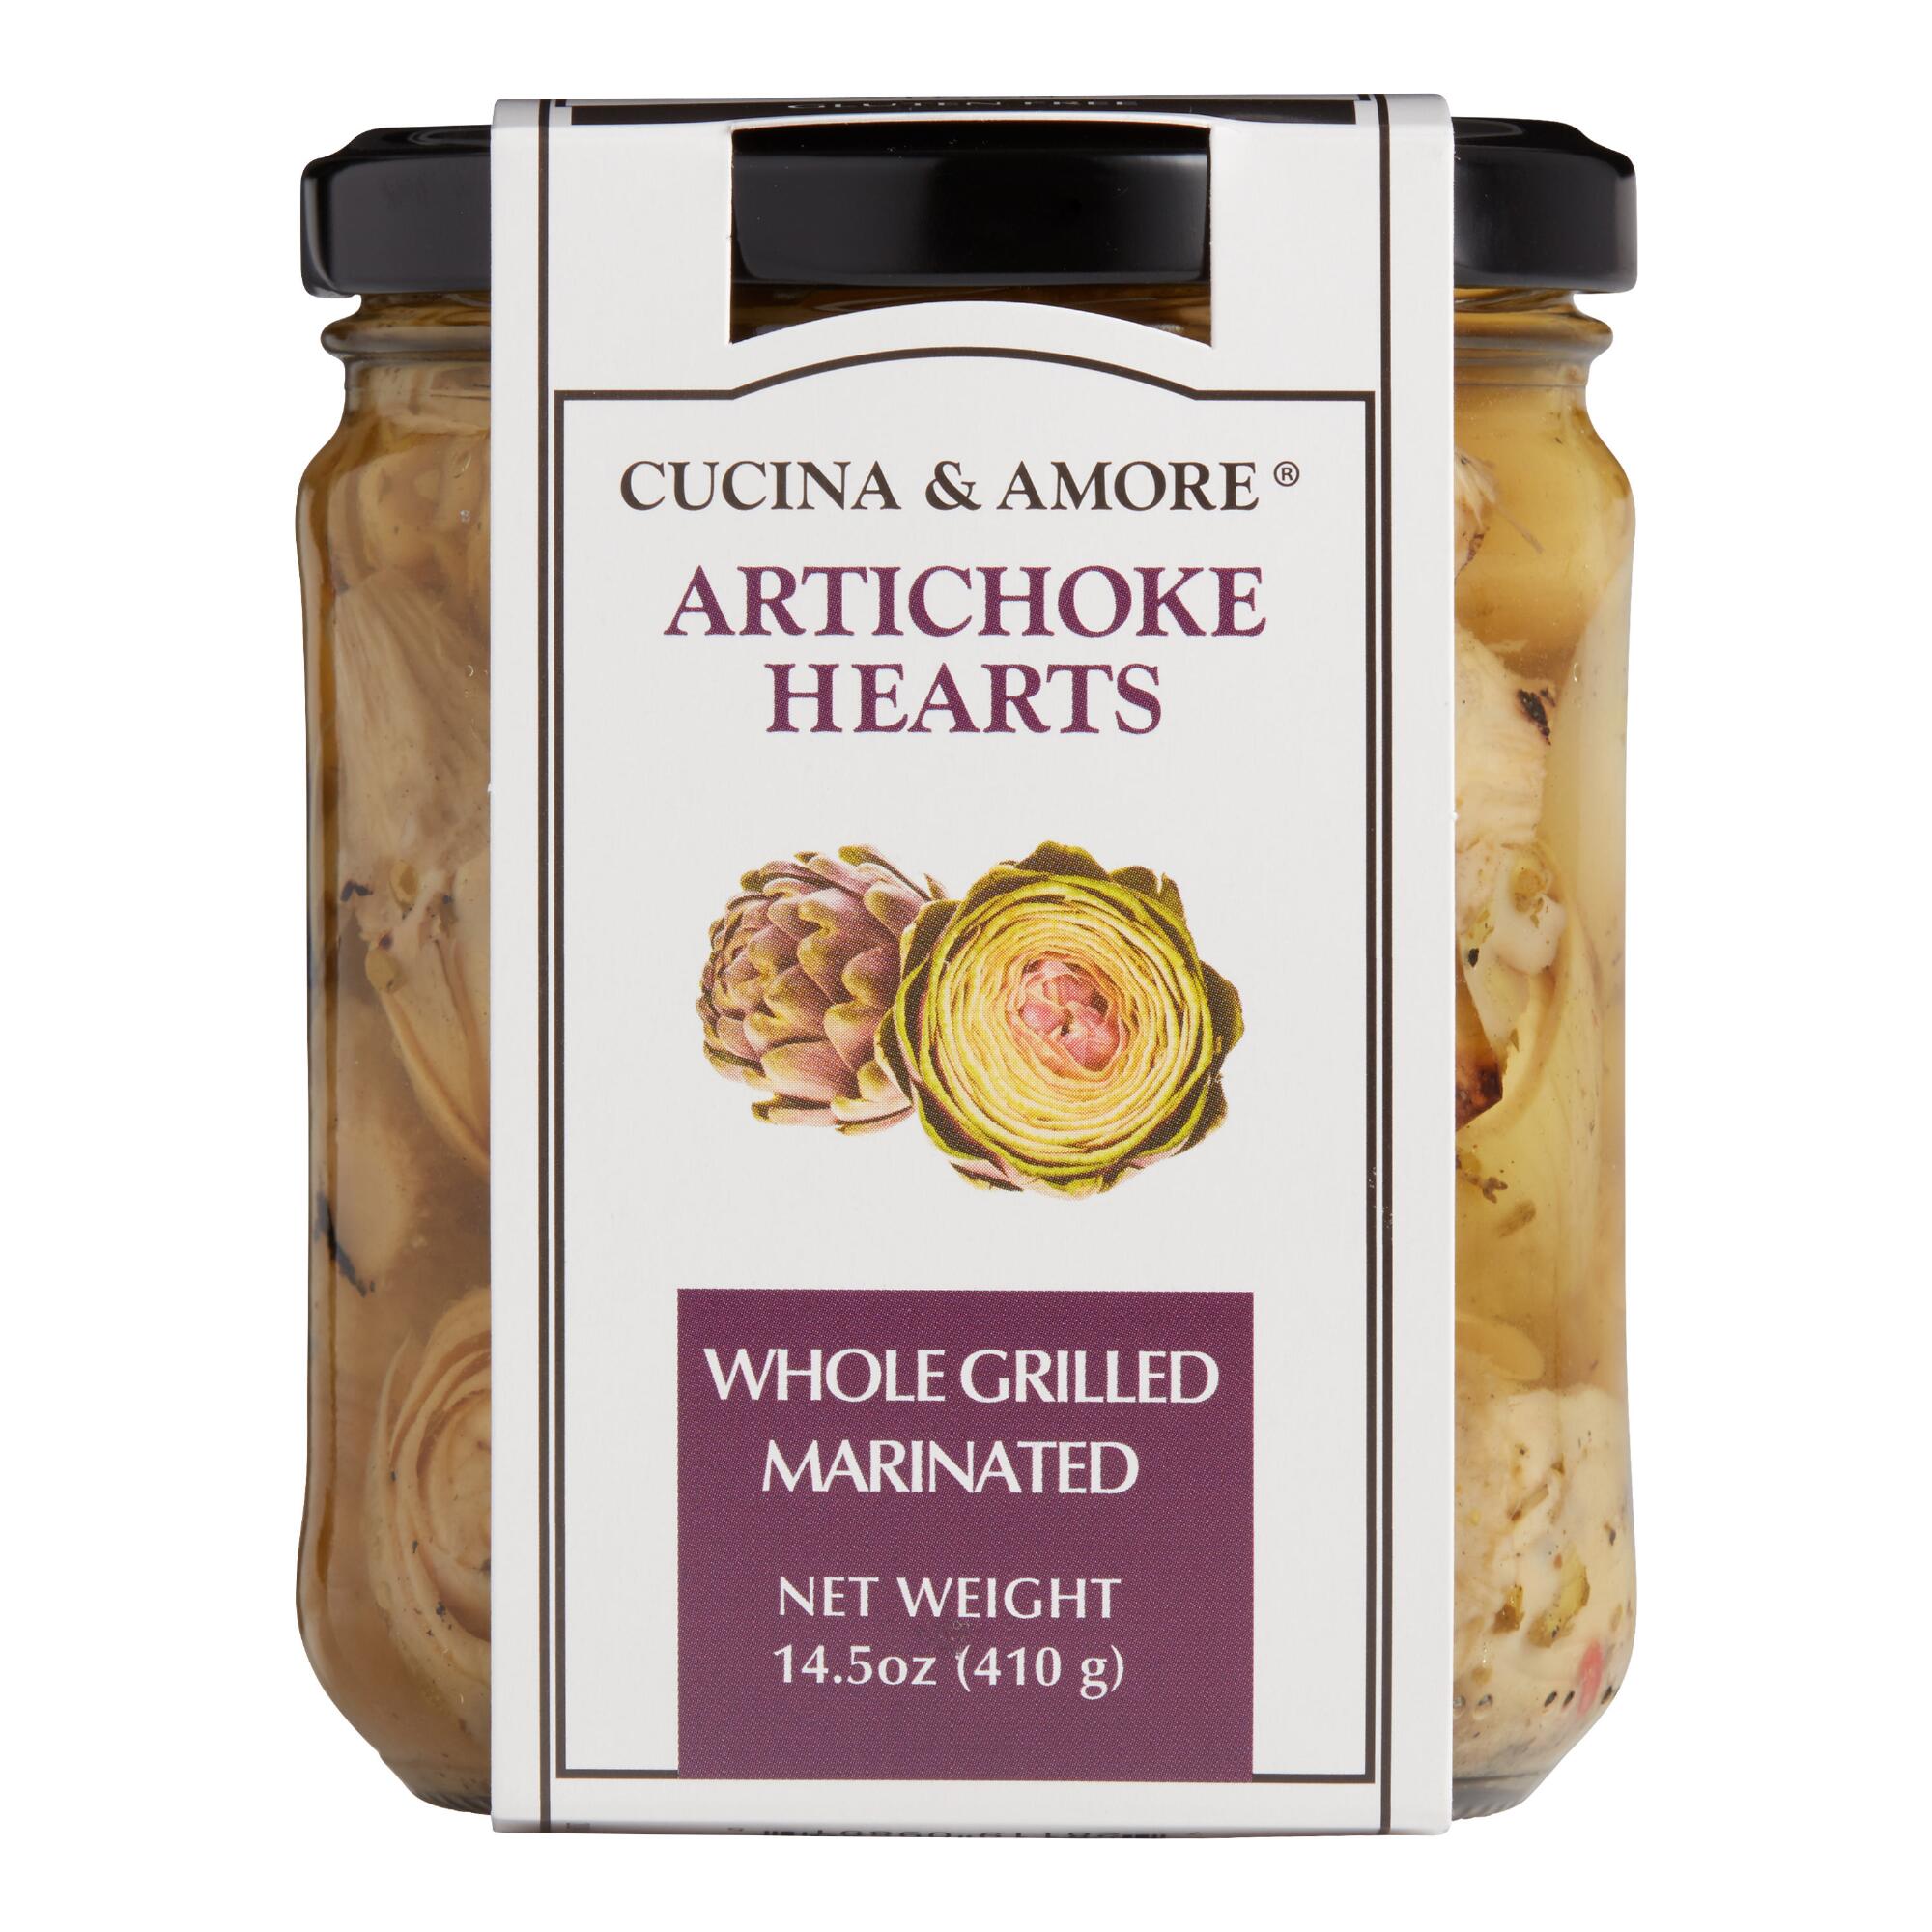 Cucina & Amore Whole Grilled Marinated Artichoke Hearts by World Market